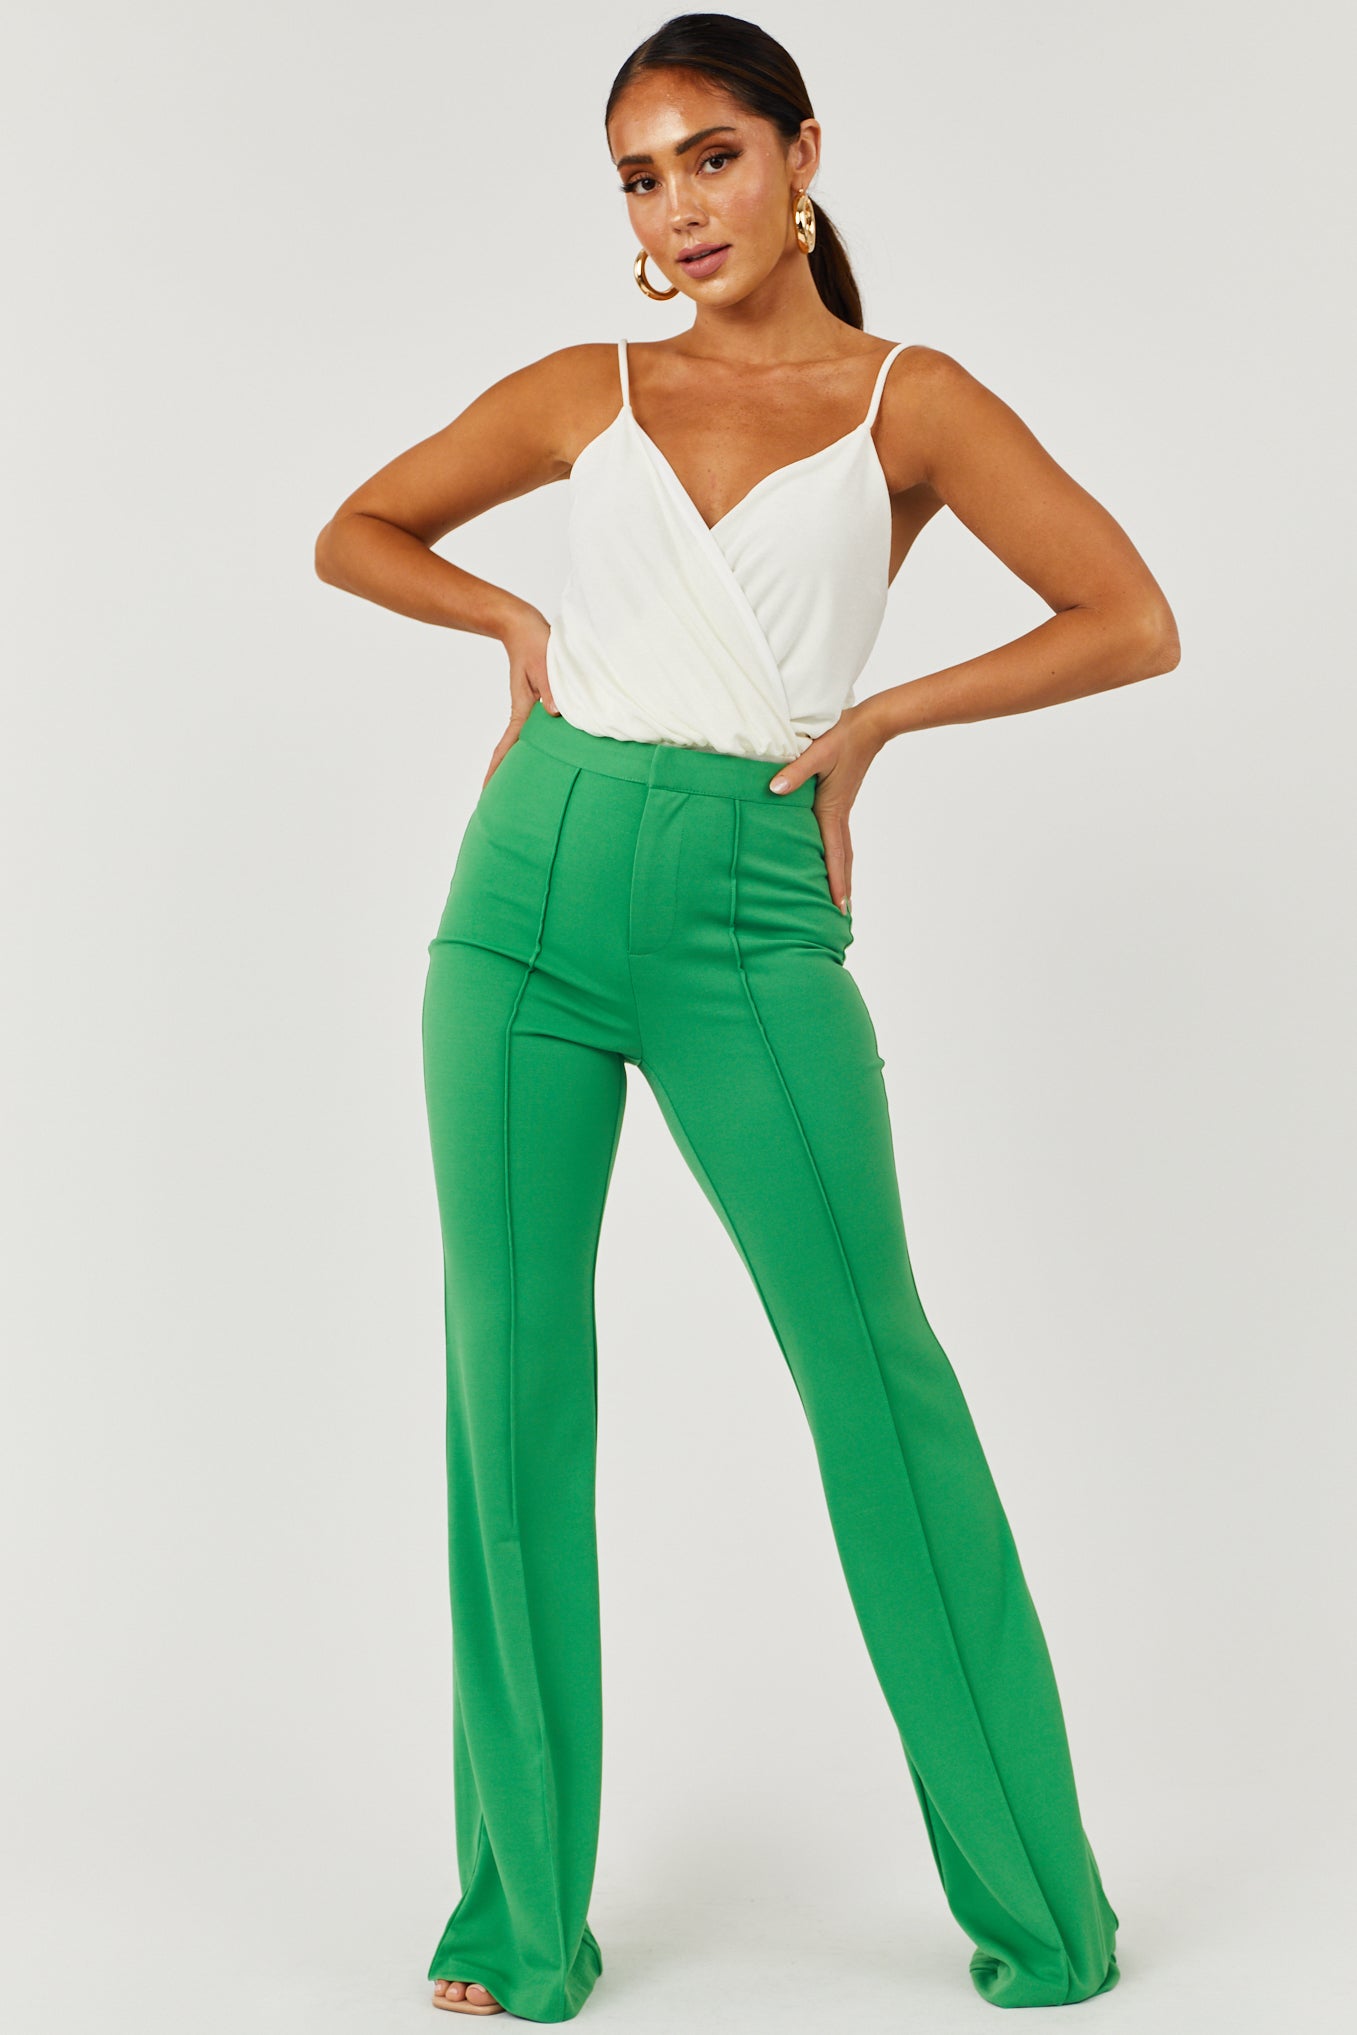 TOPSHOP Floral Mesh Seam Skinny Flare Trouser With Front Hem Splits in  Green